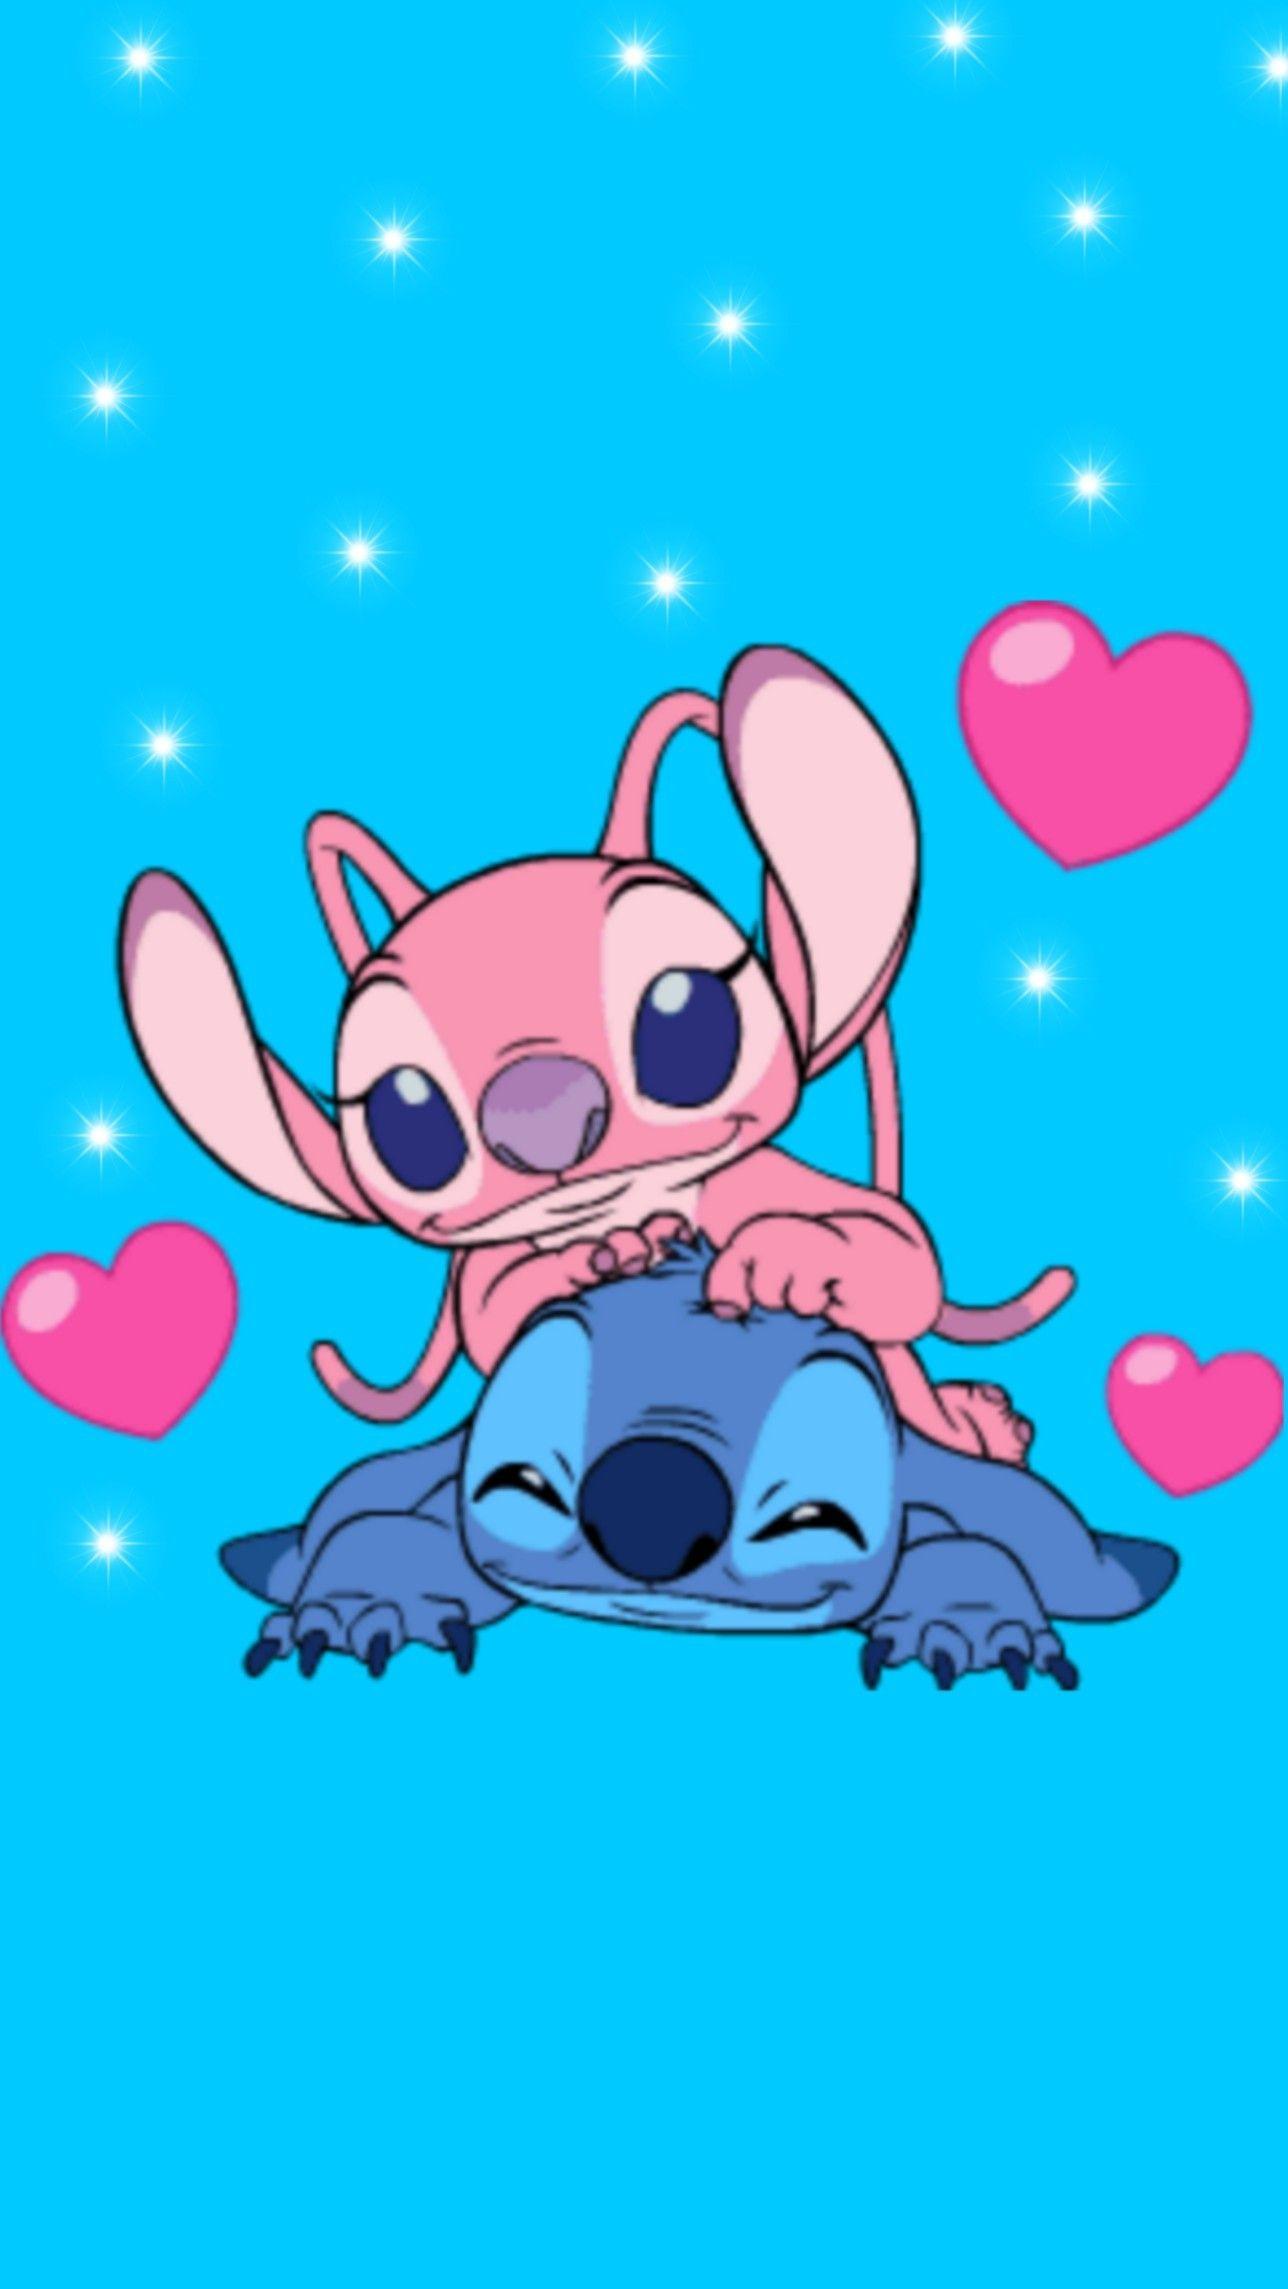 Stitch and Angel wallpaper by MadalinaIrina  Download on ZEDGE  d69b